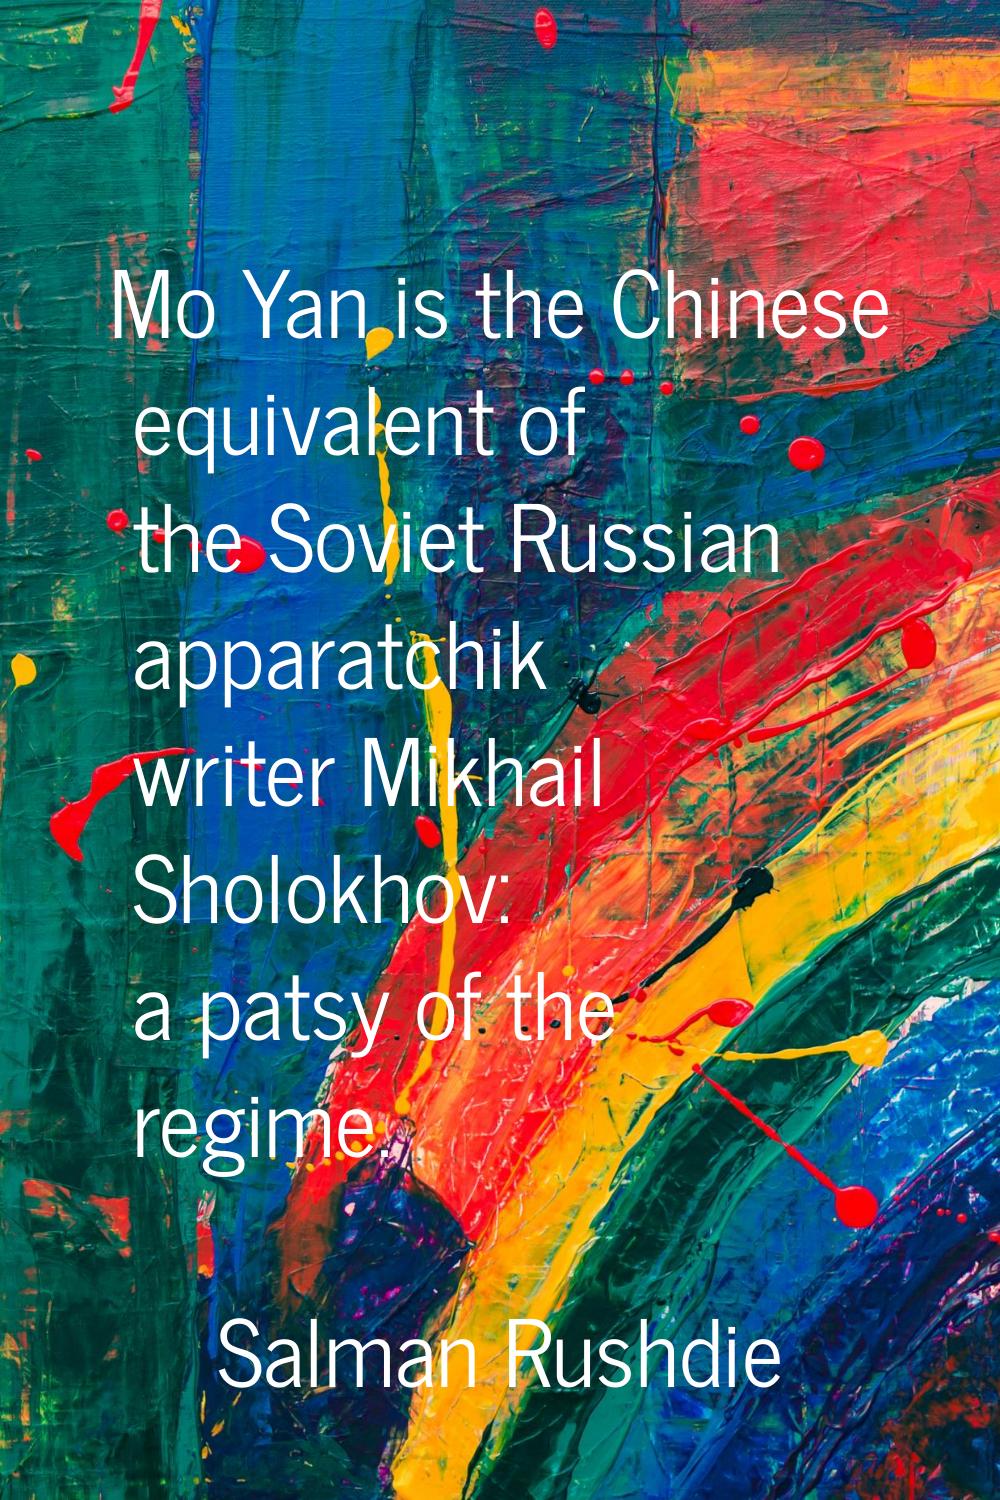 Mo Yan is the Chinese equivalent of the Soviet Russian apparatchik writer Mikhail Sholokhov: a pats